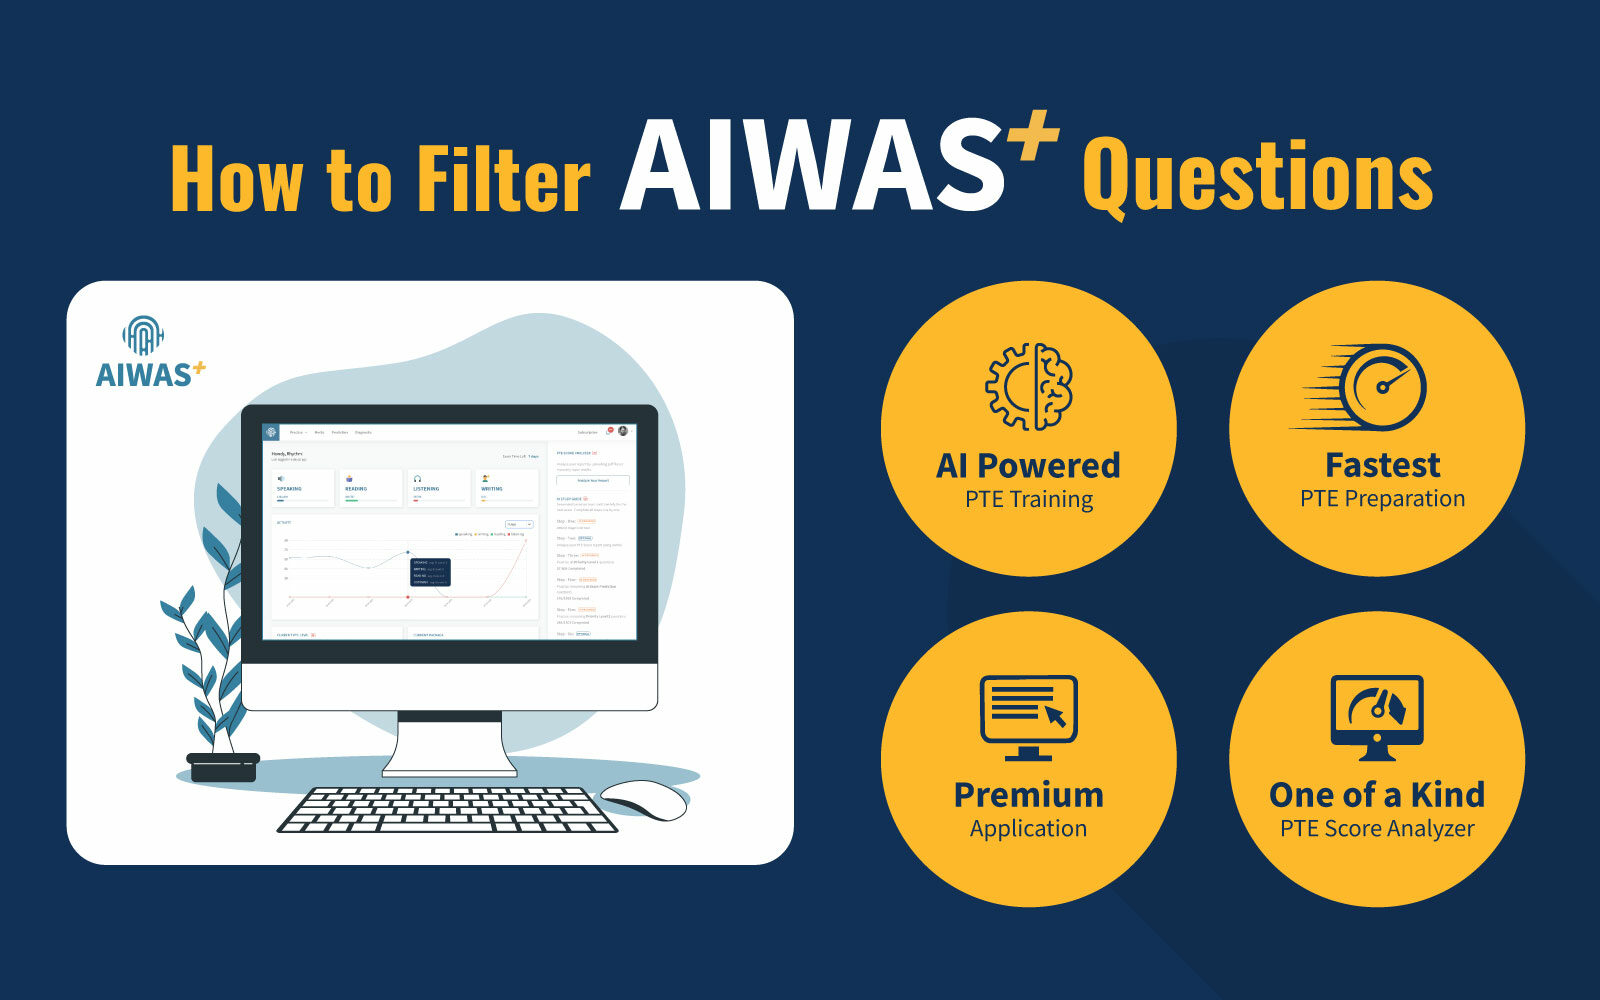 How to Filter AIWAS Plus Questions?